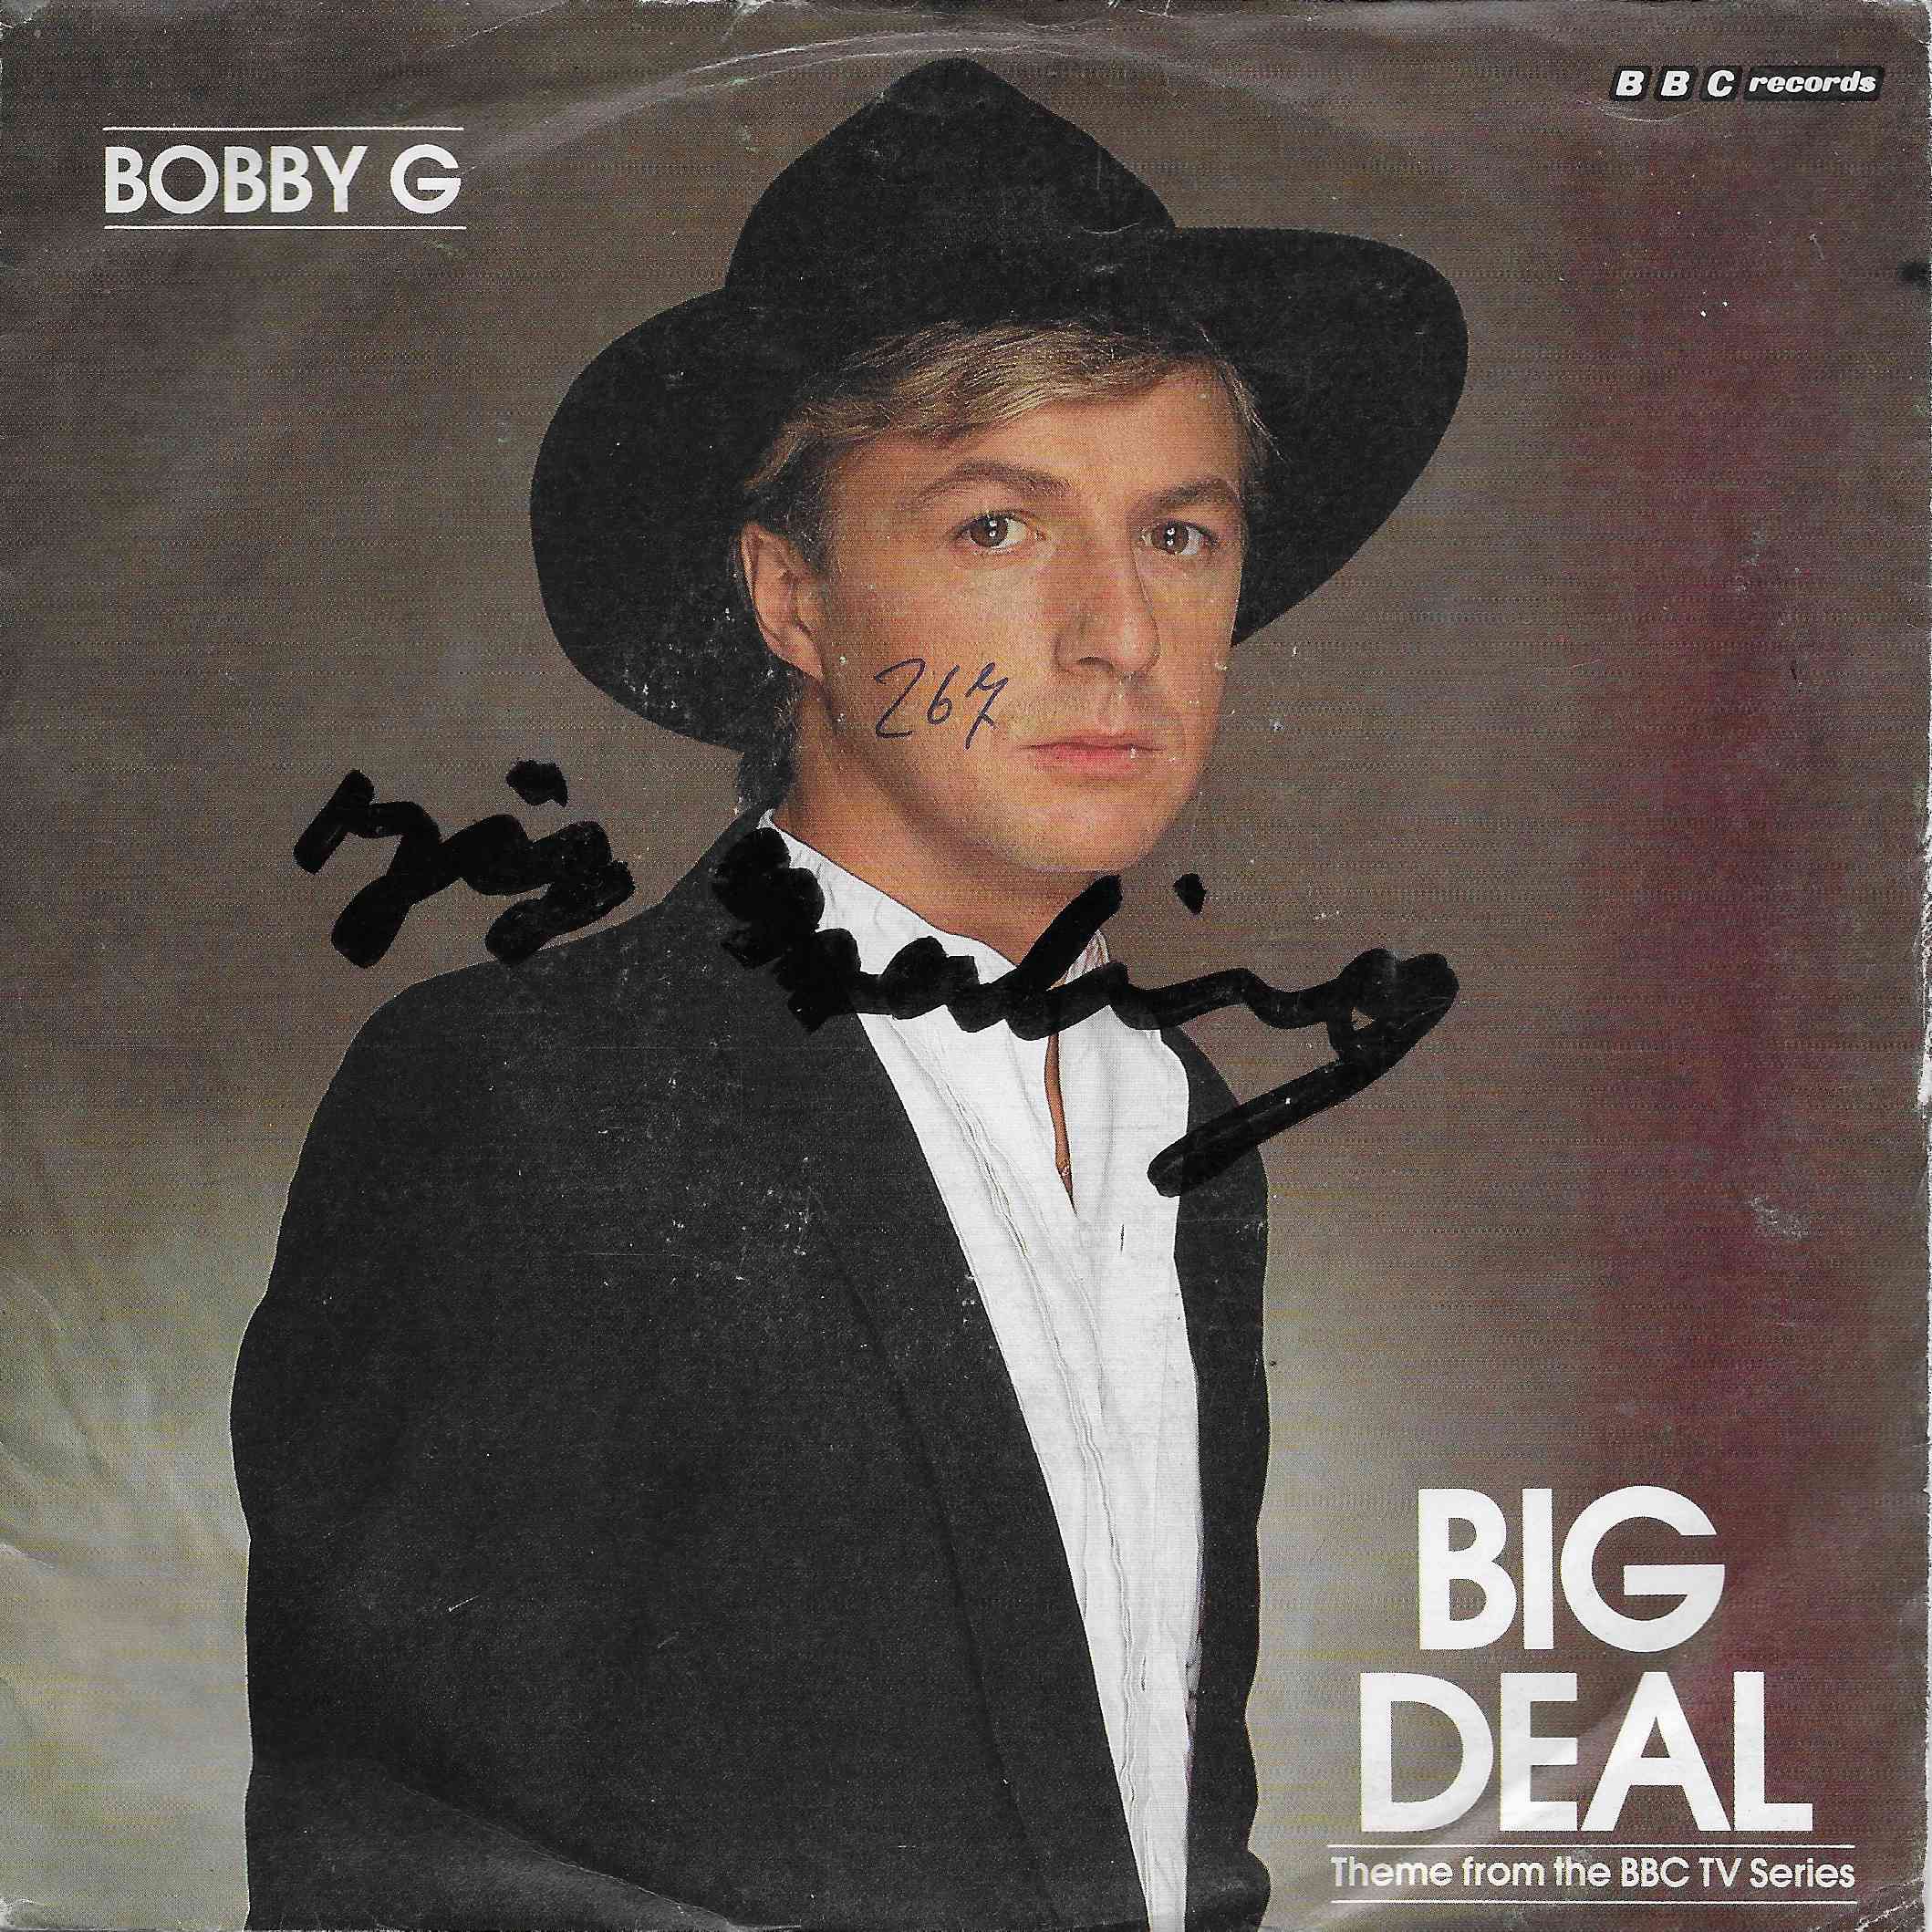 Picture of Big Deal by artist Bobby G from the BBC singles - Records and Tapes library